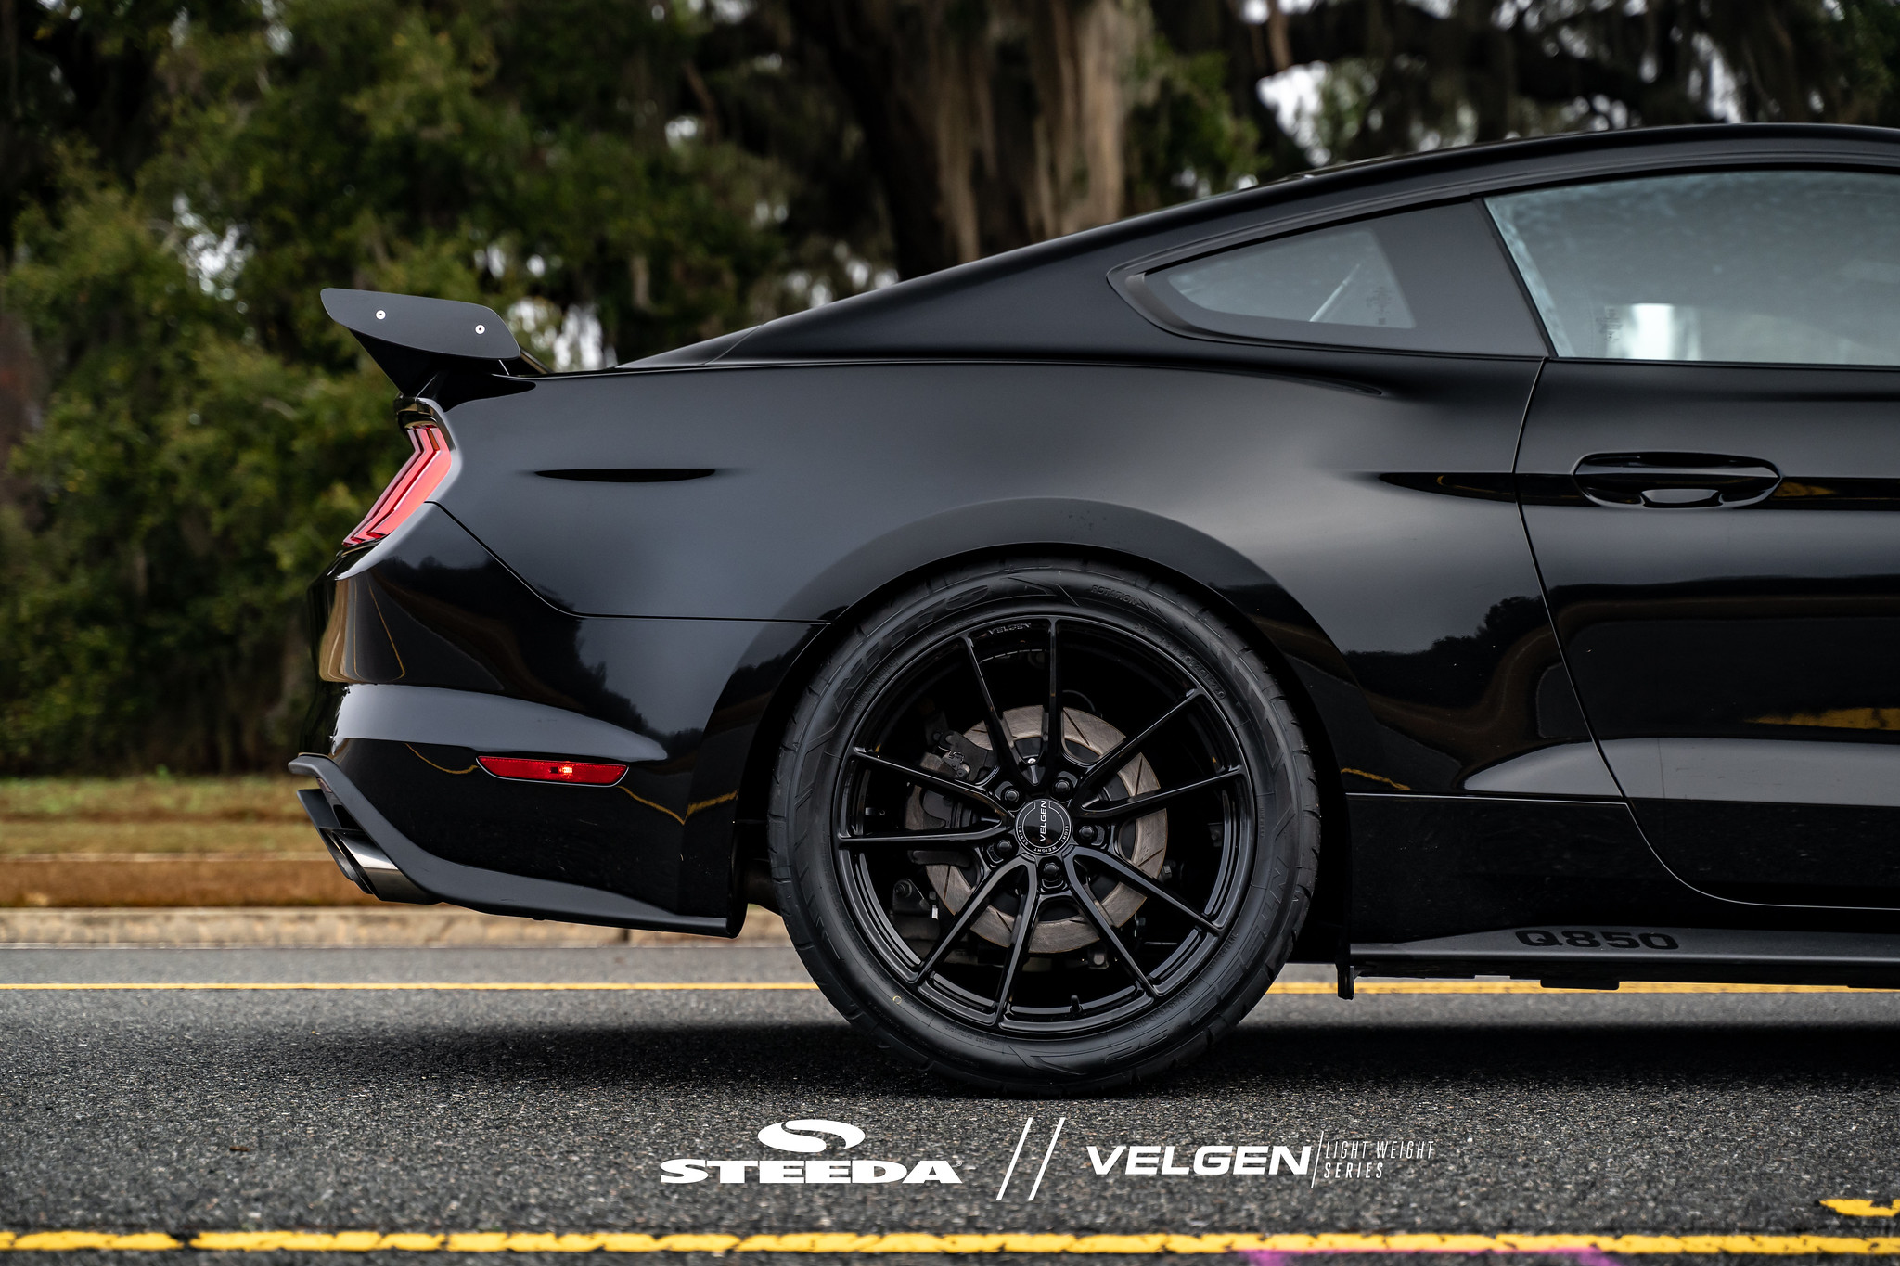 S650 Mustang 19" 20" Velgen Flow Forged Concave Wheels Mustang S650 - Vibe Motorsports Official Thread 52616308288_30a4901386_k